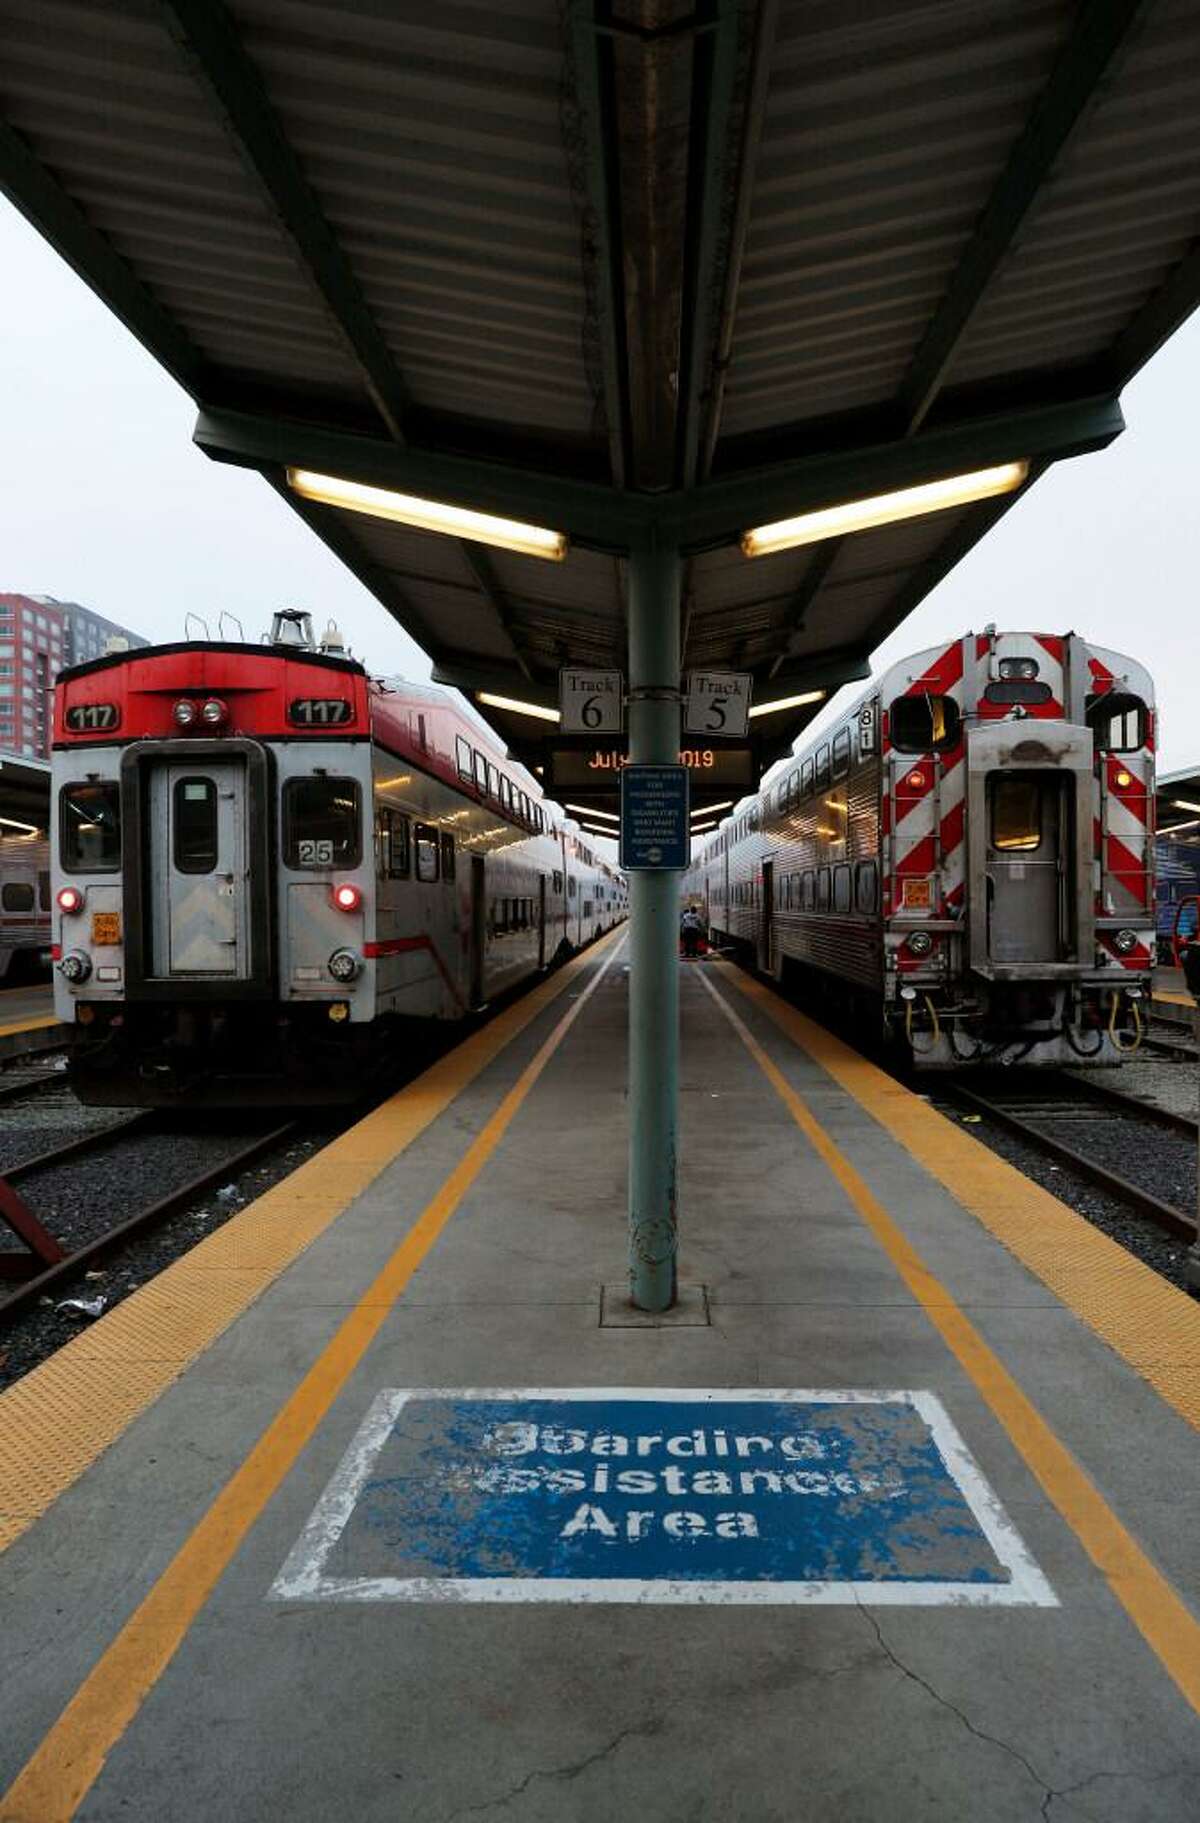 Two Caltrain trains sit at the Caltrain Station in San Francisco, Calif., on Thursday, July 18, 2019. Business leaders and transportation officials are putting together a sales tax ballot measure for next year that would generate billions for transportation infrastructure in the Bay Area.